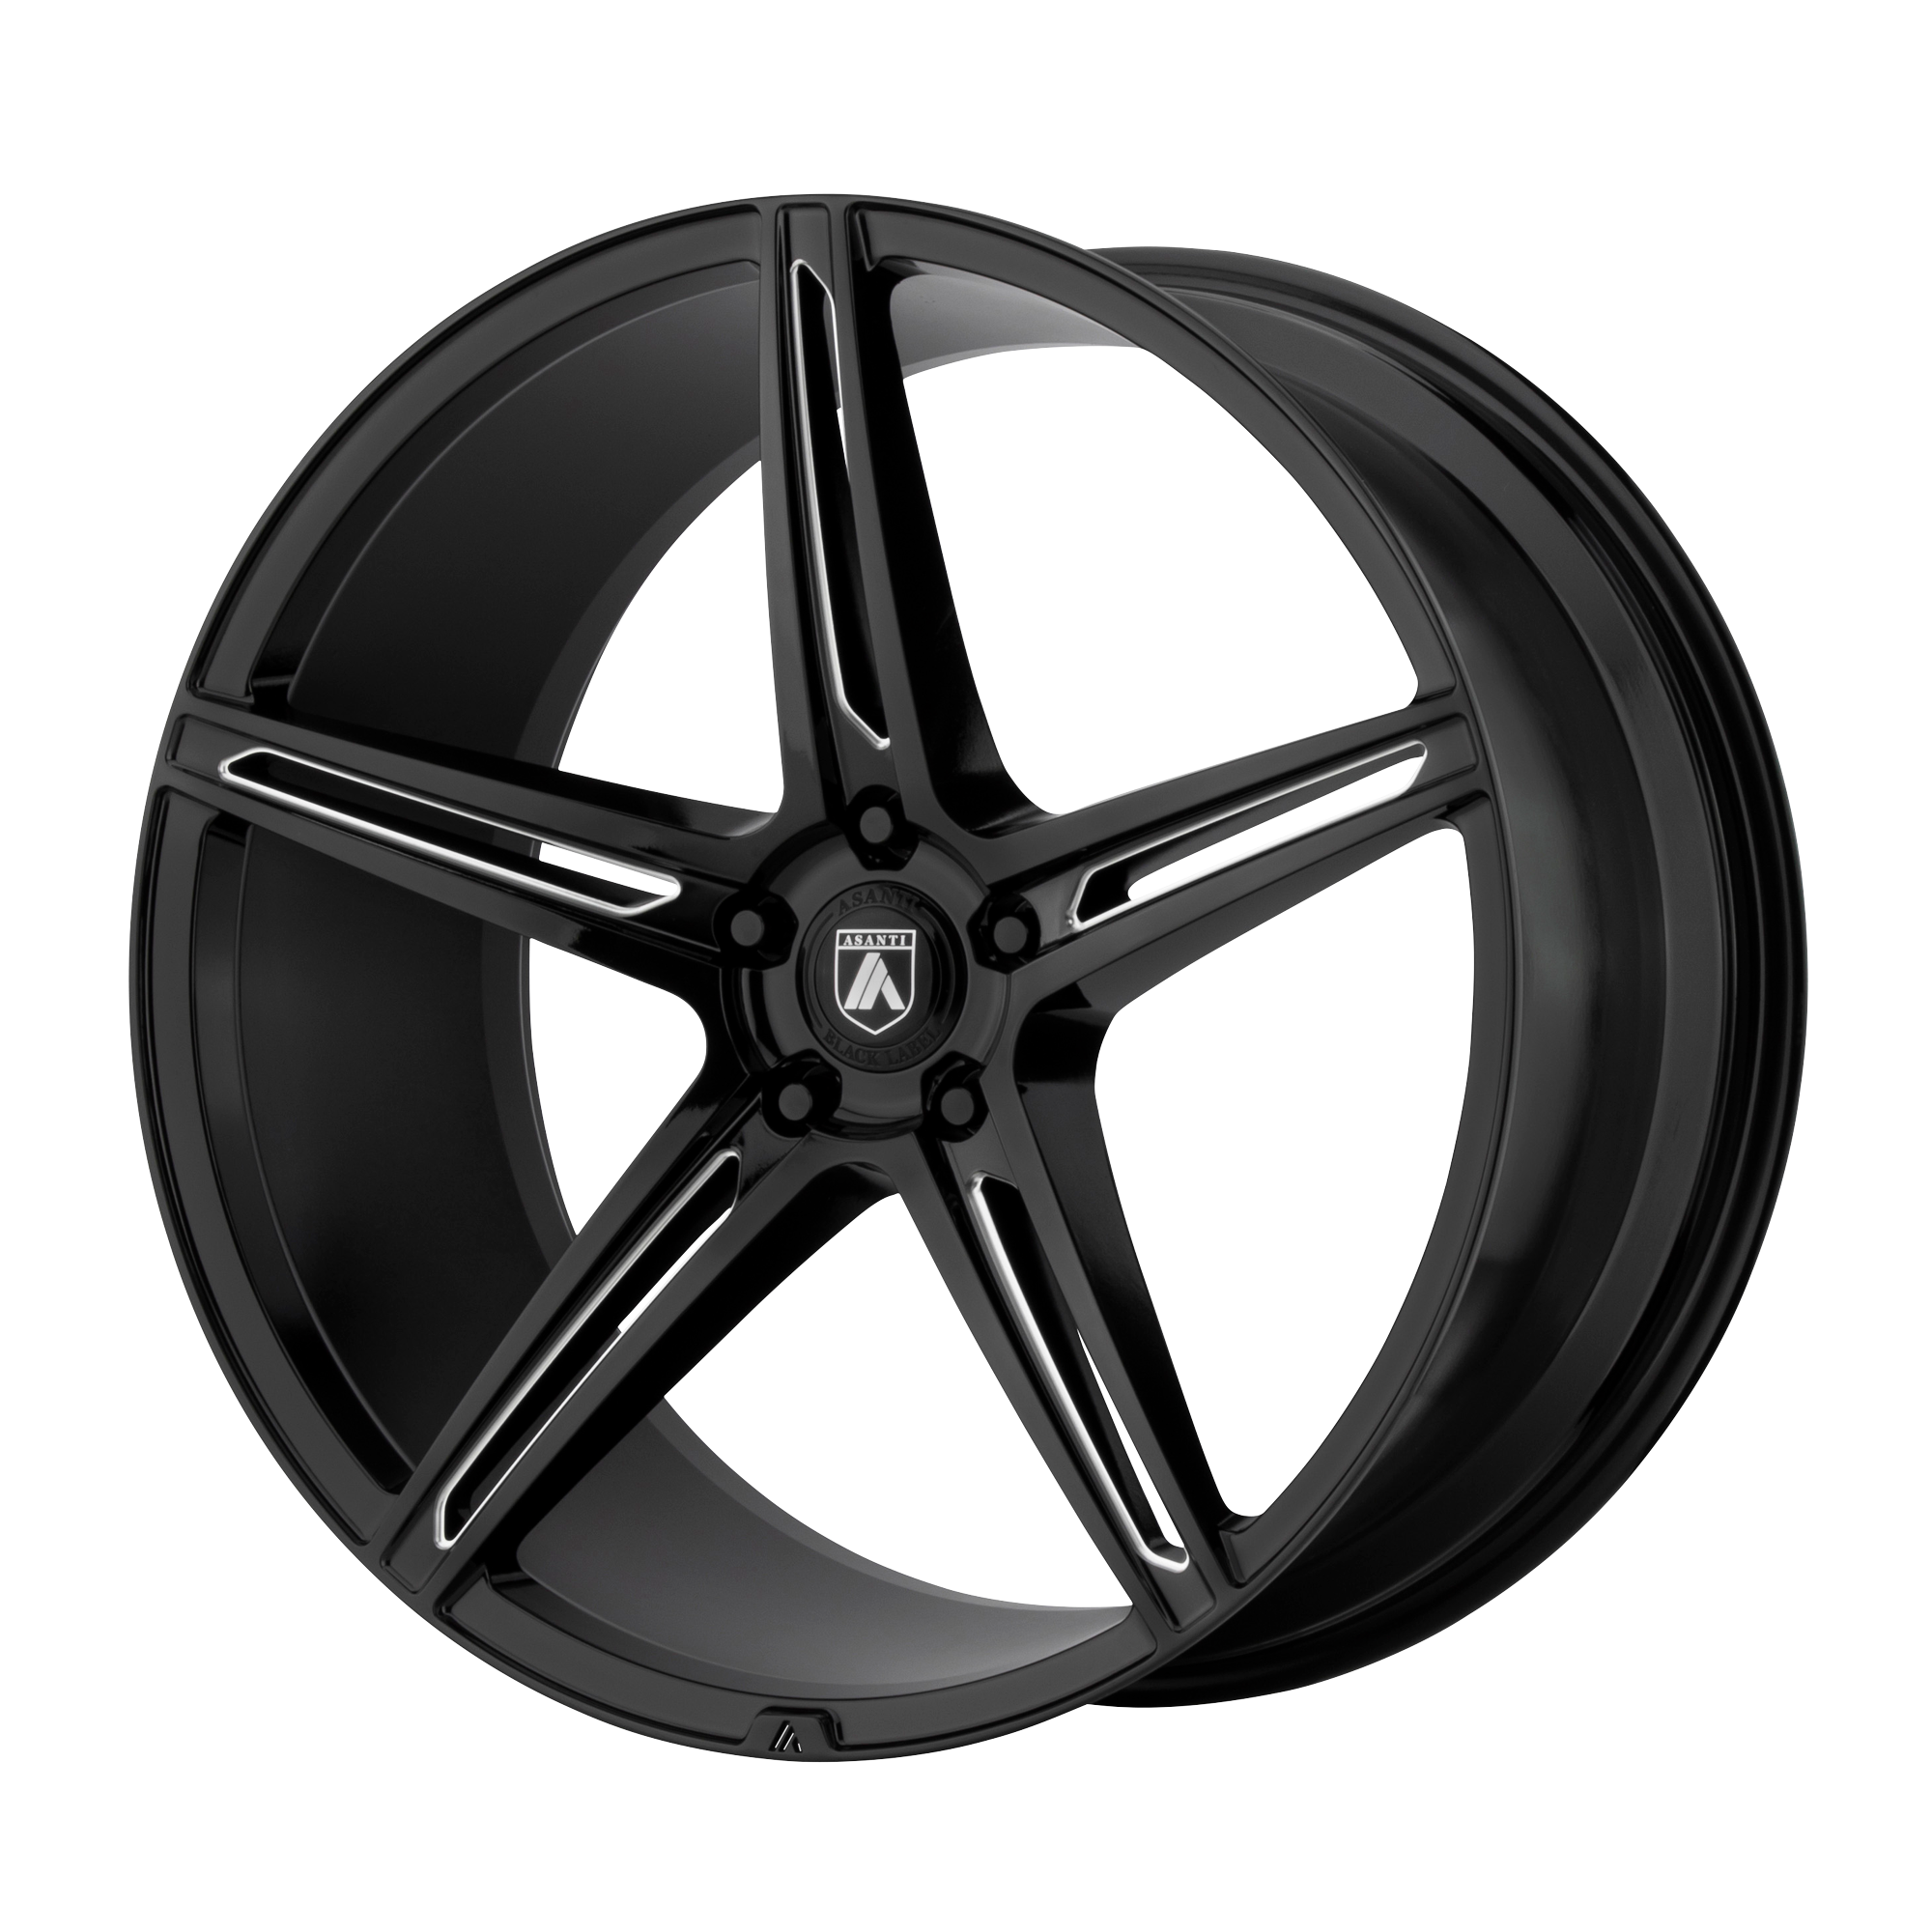 ALPHA 5 20x10.5 5x114.30 GLOSS BLACK MILLED (38 mm) - Tires and Engine Performance